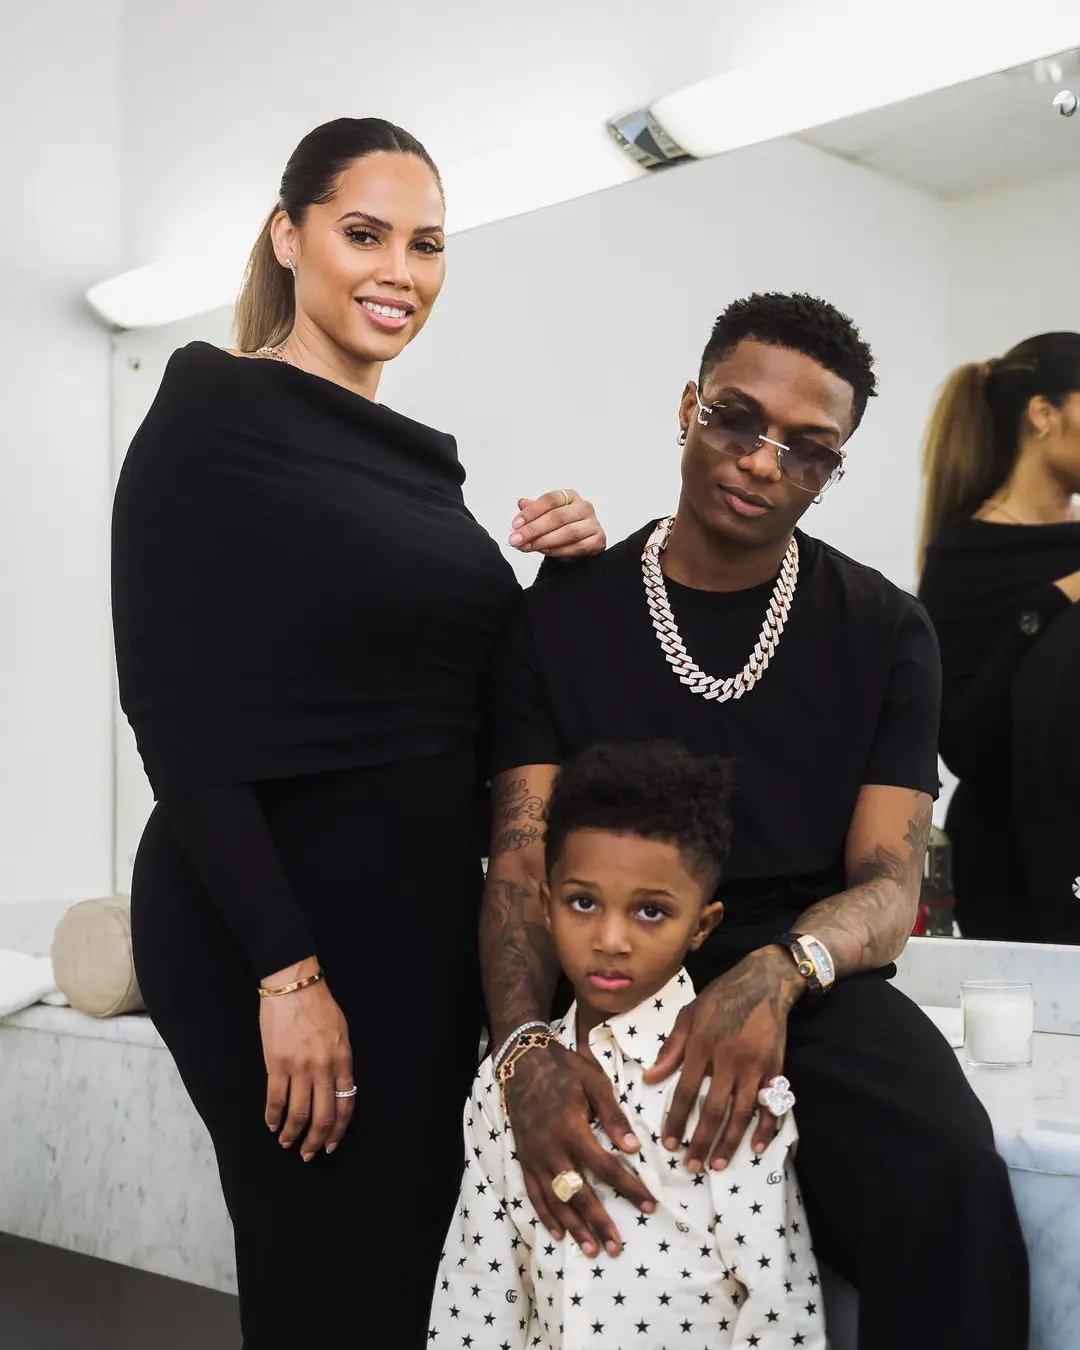 Zion, Wizkid'S Son, Distributes Toys In Ghana While On A Charity Trip With His Family 1